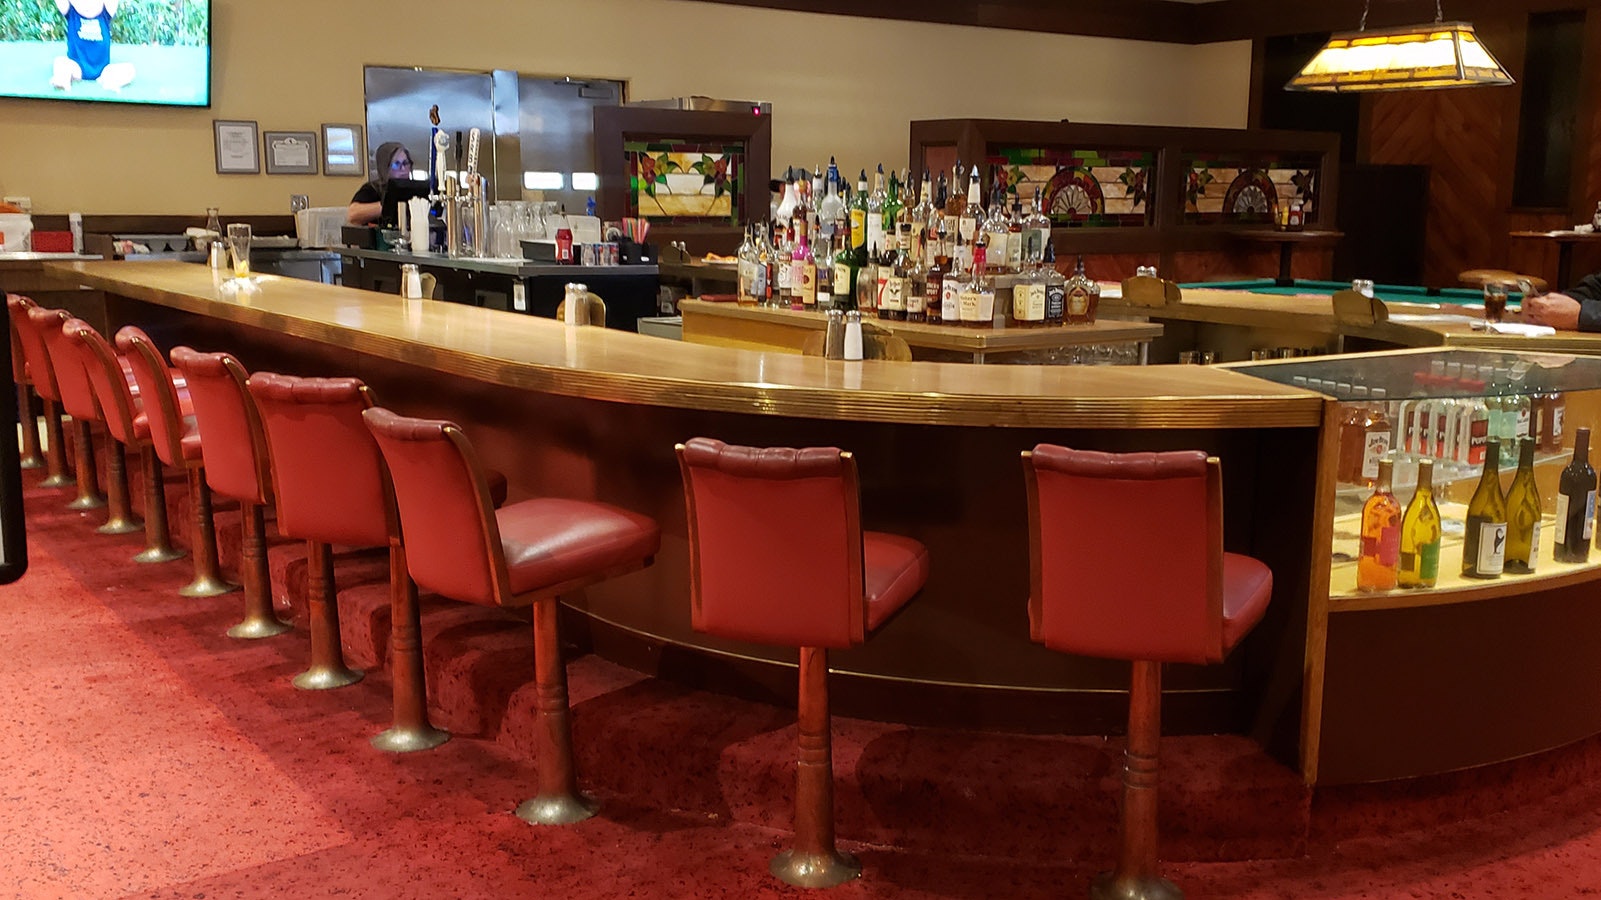 The bar at Little America also dates back to the 1950s.